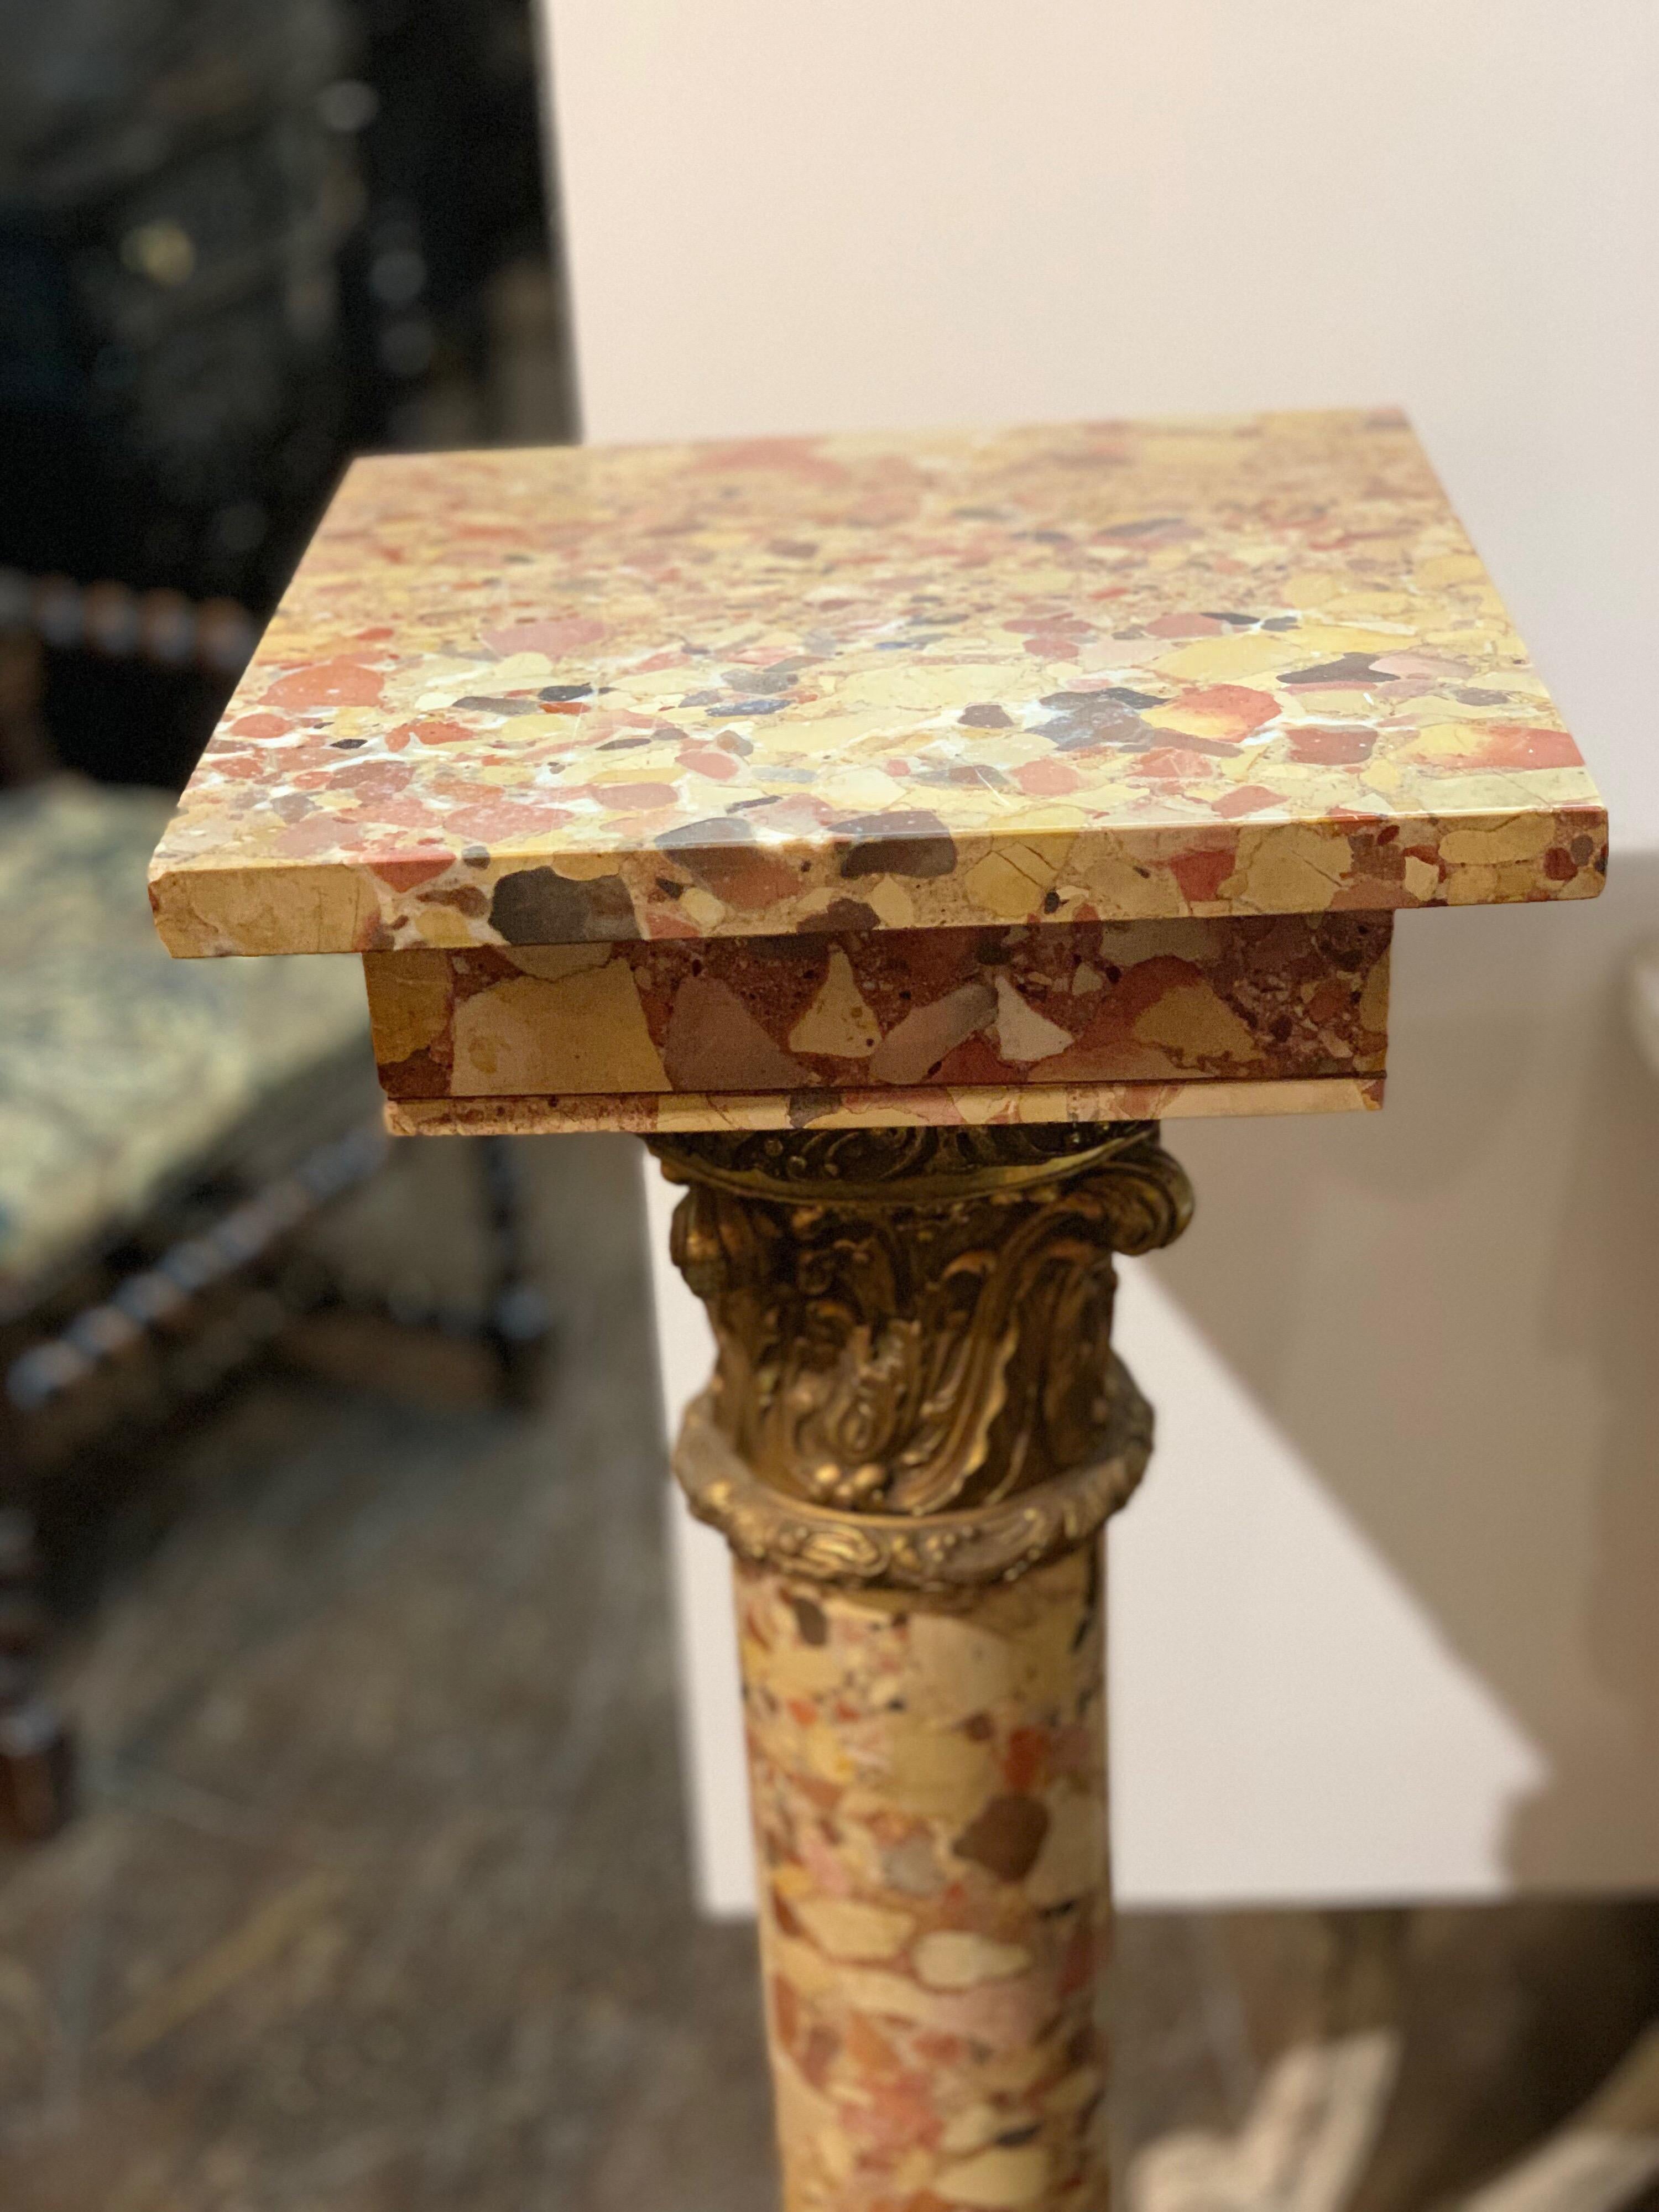 Beautiful pair of 19th century French Breccia marble pedestals with bronze mounts.
Very fine quality and would create a great architectural element.